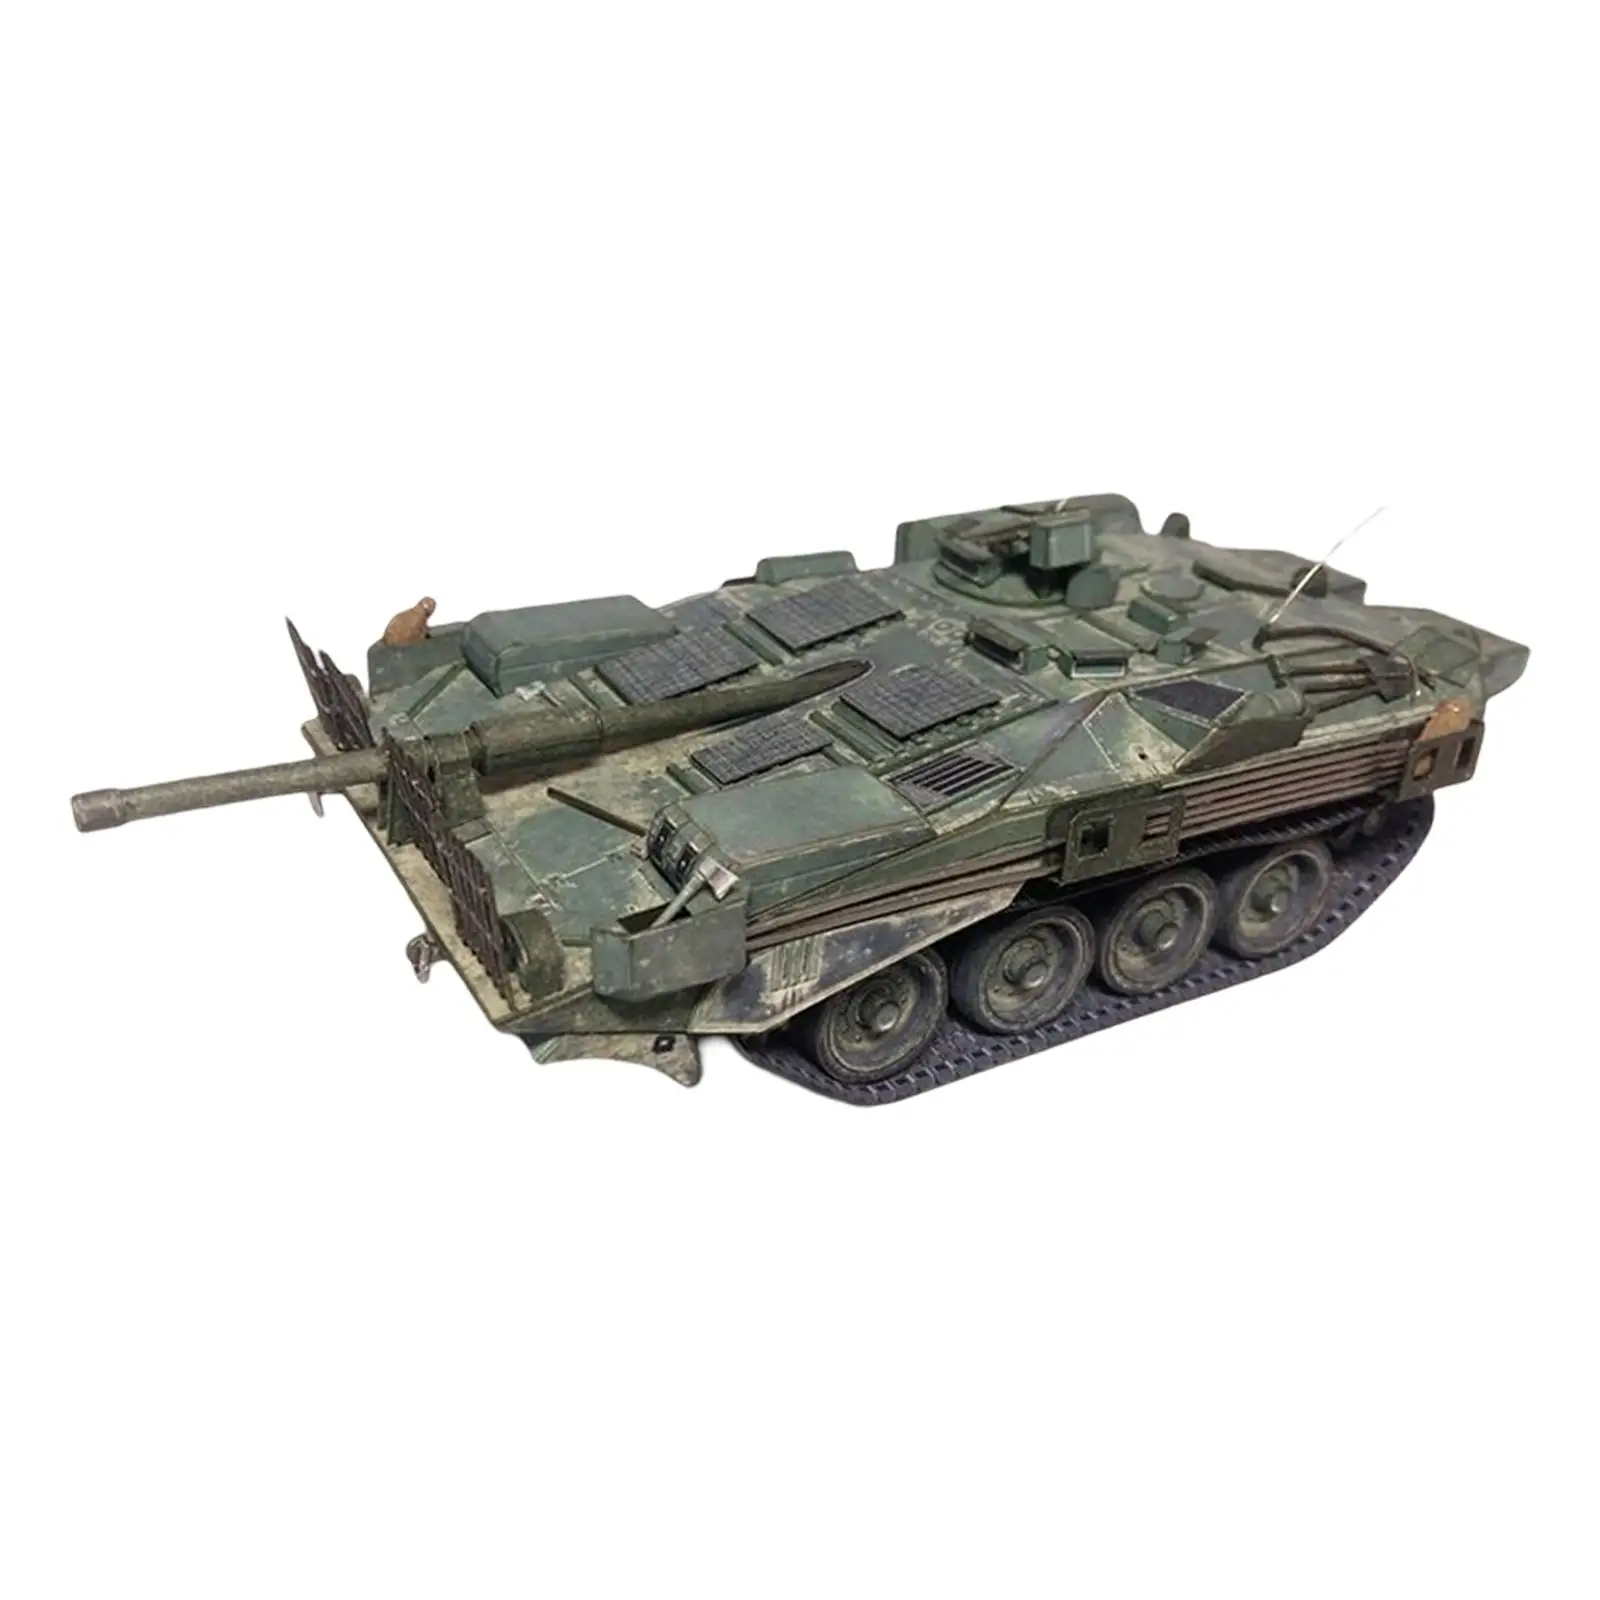 

1:35 Tank Model Decorations DIY Assemble Toy Collectibles Building Kits Cardboard 3D Paper Puzzle Tabletop Decor for Gifts Boys